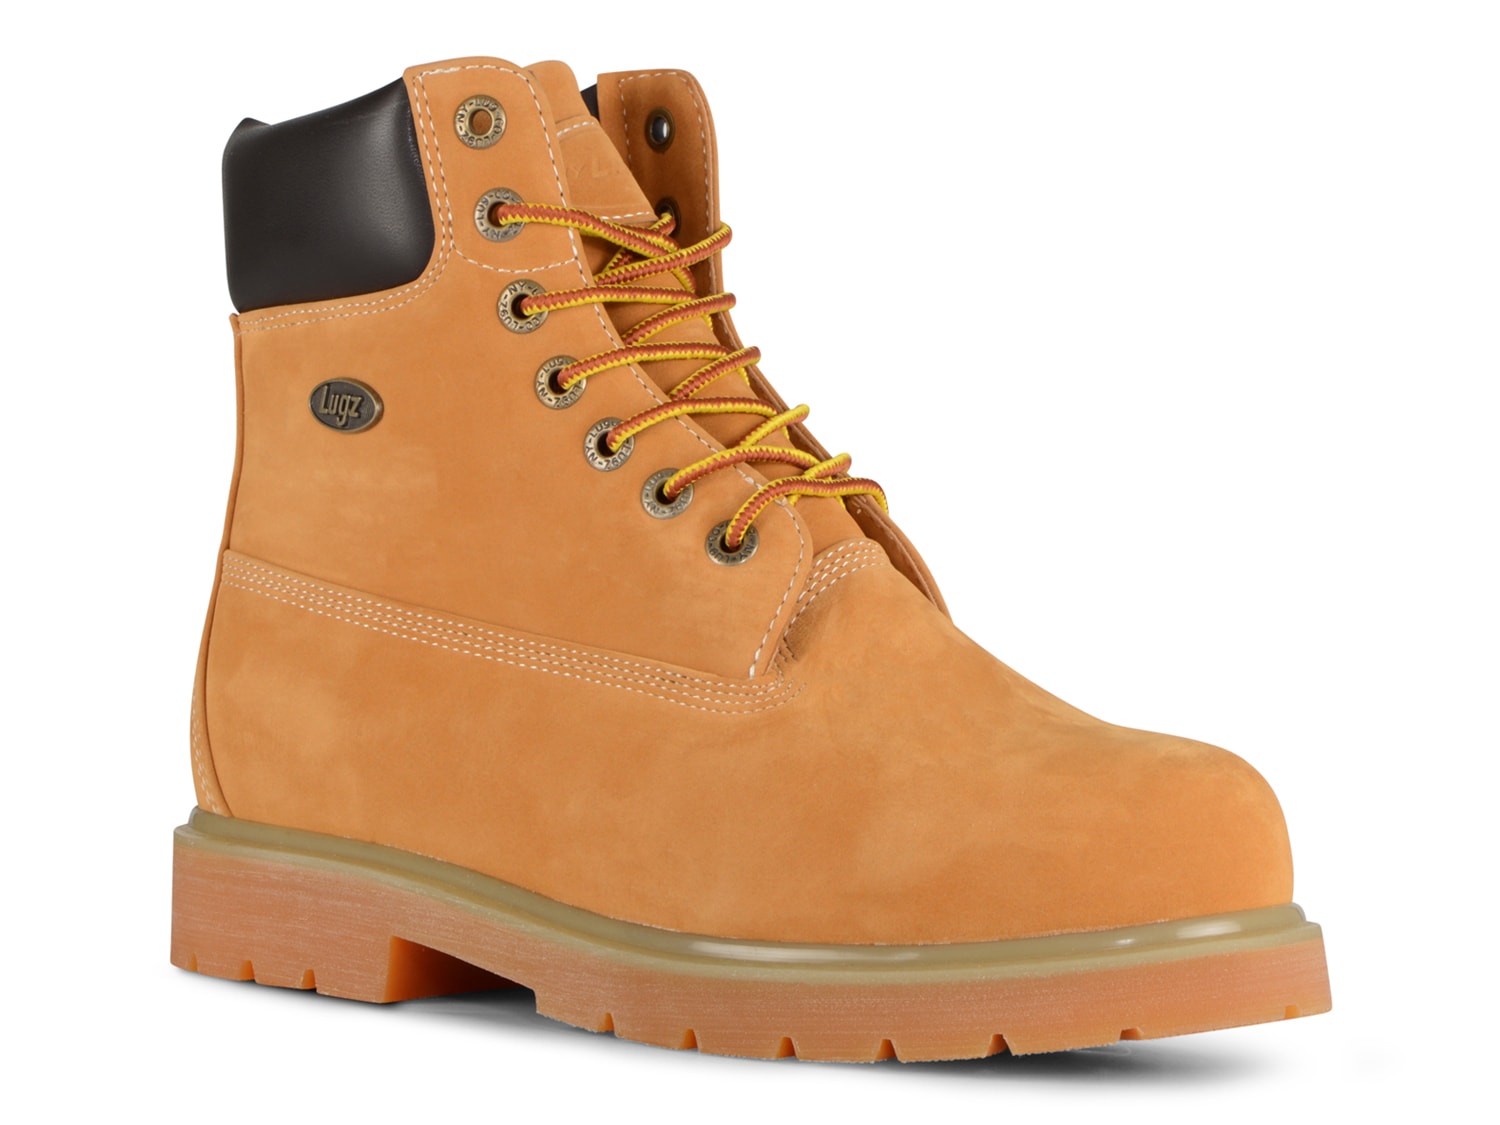 6 inch construction timberland boots